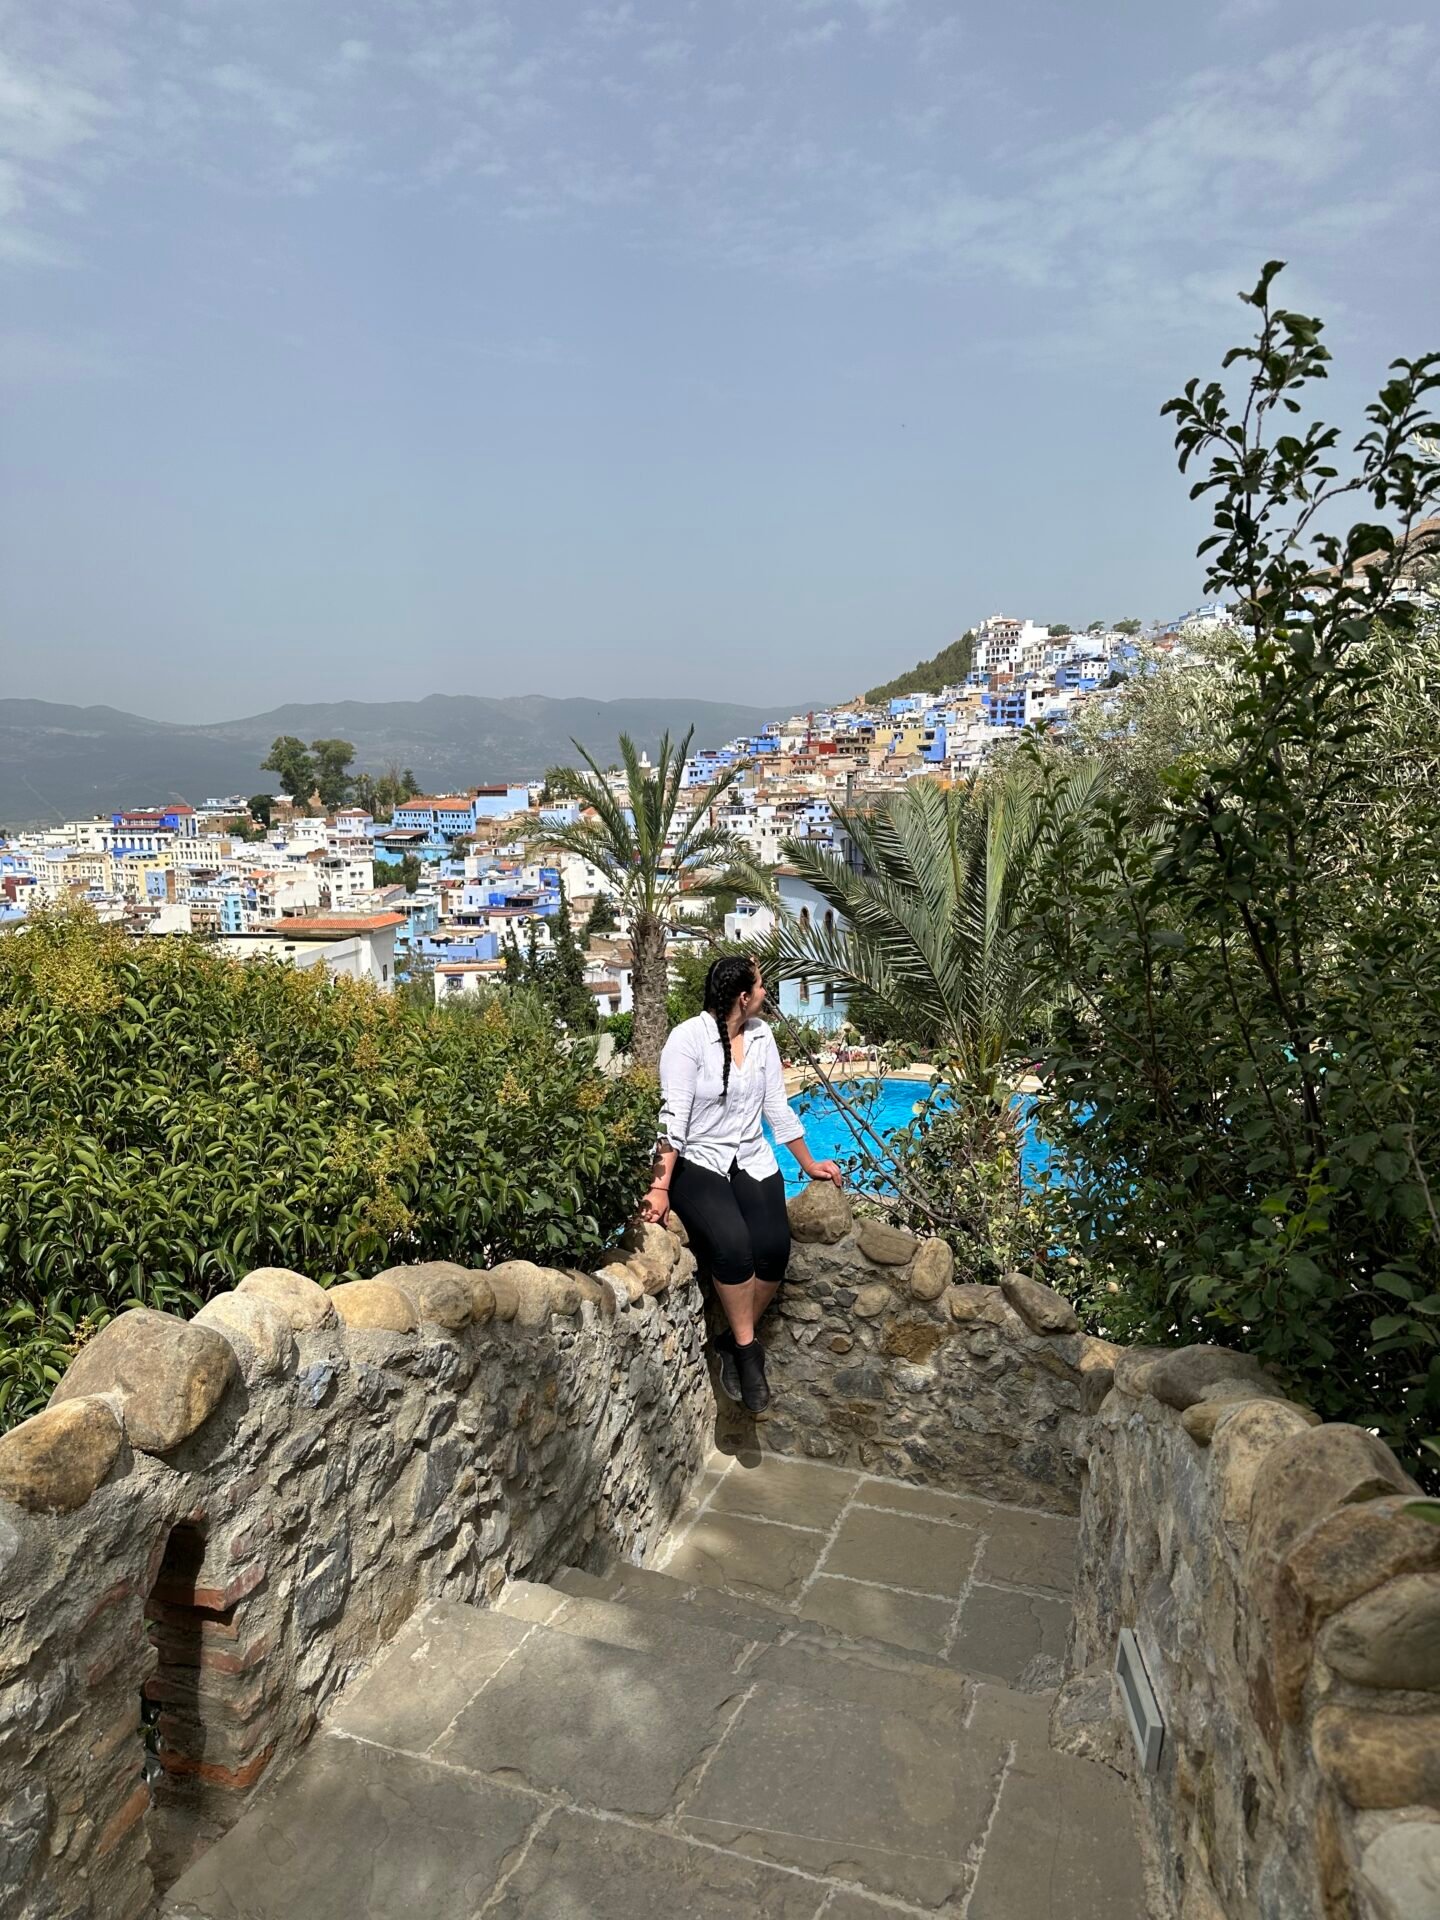 Seated comfortably, a figure enjoys a moment of tranquility with the captivating backdrop of Chefchaouen, Morocco. The city's distinctive blue-washed buildings create a striking contrast against the rugged landscape, while the distant mountains add depth to the scene. A harmonious blend of relaxation and vibrant culture, perfectly framed in this picturesque moment.